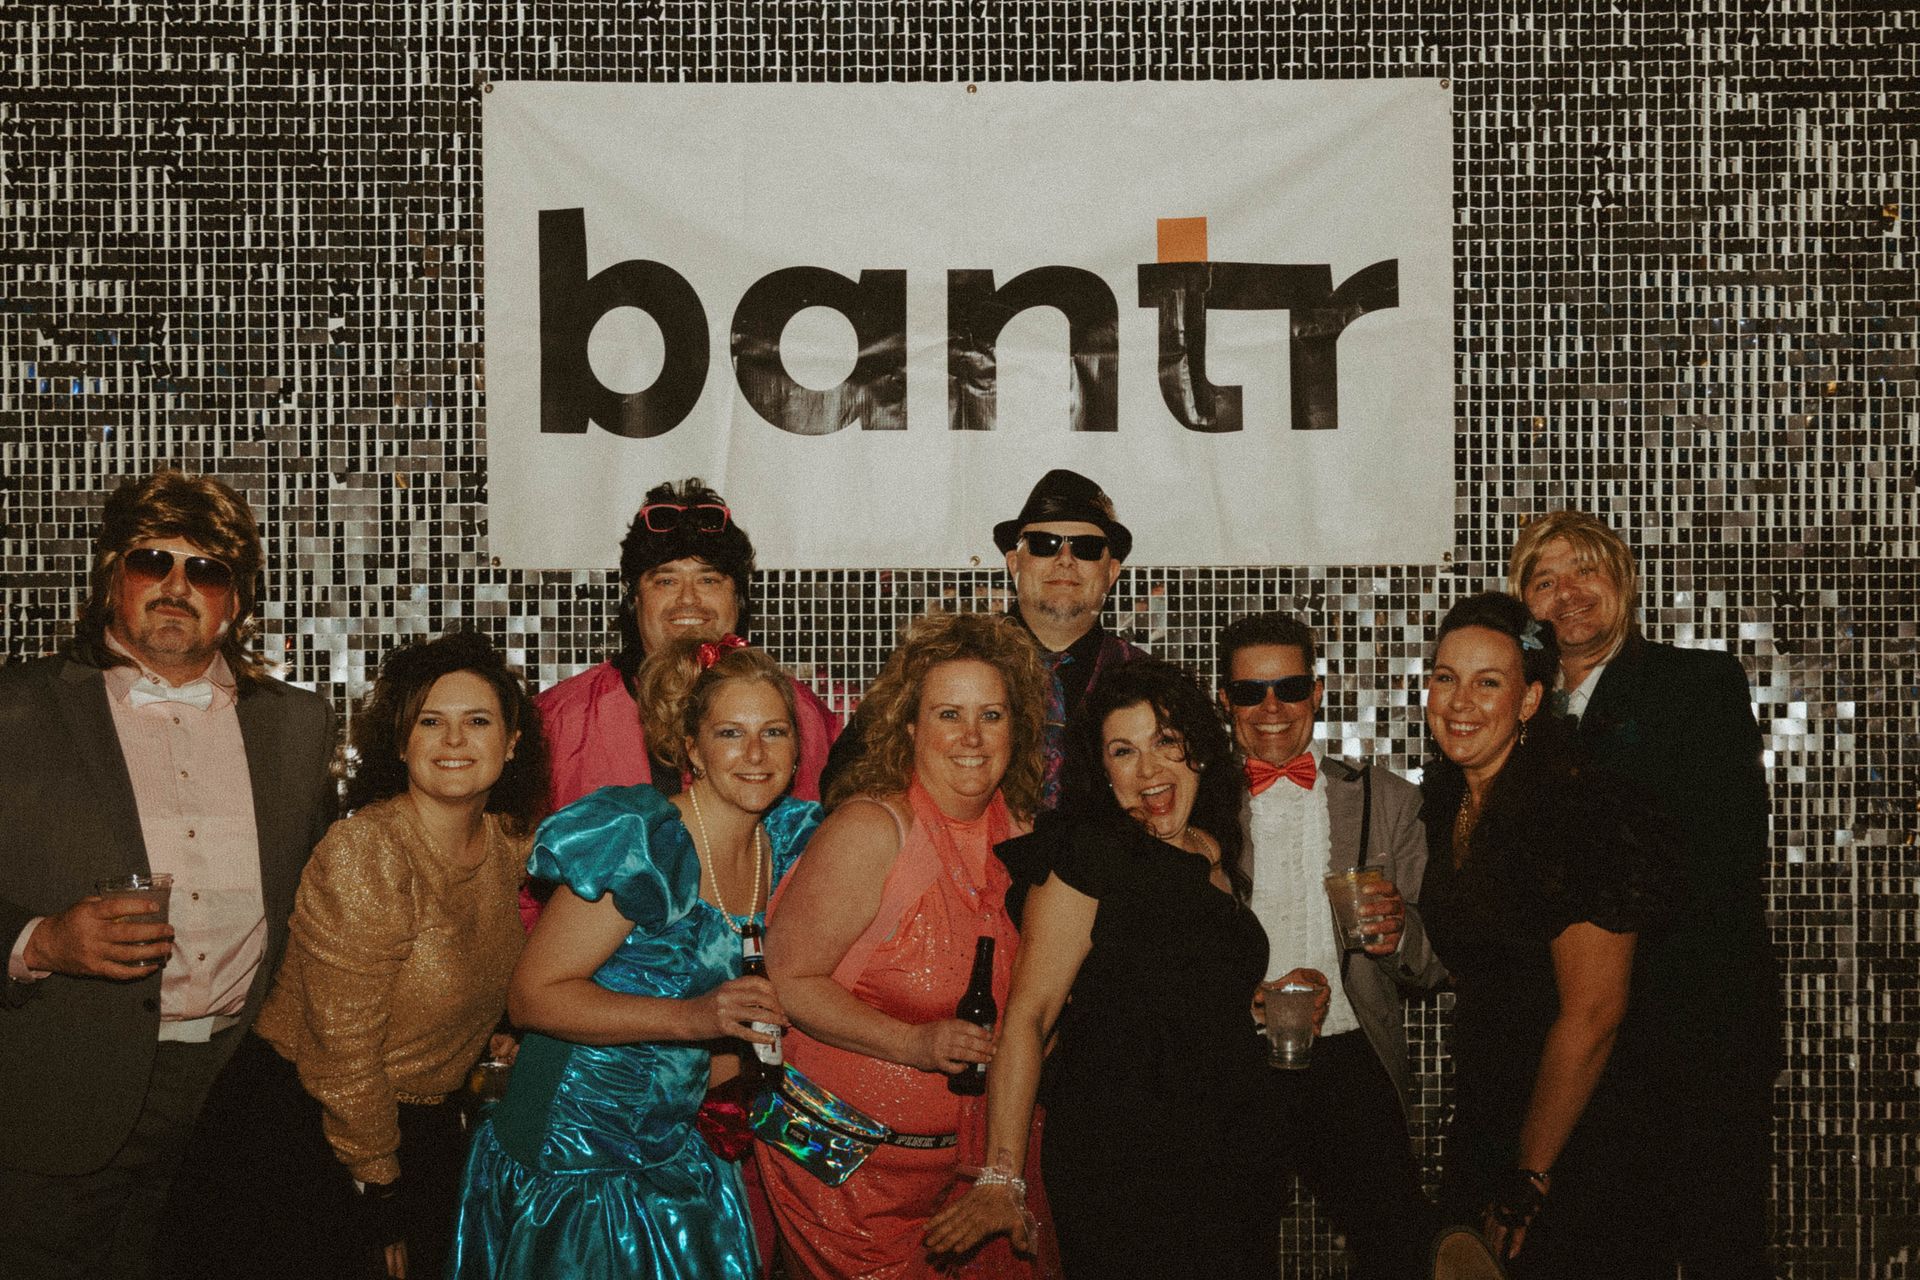 Party at Bantr in Rothschild, WI